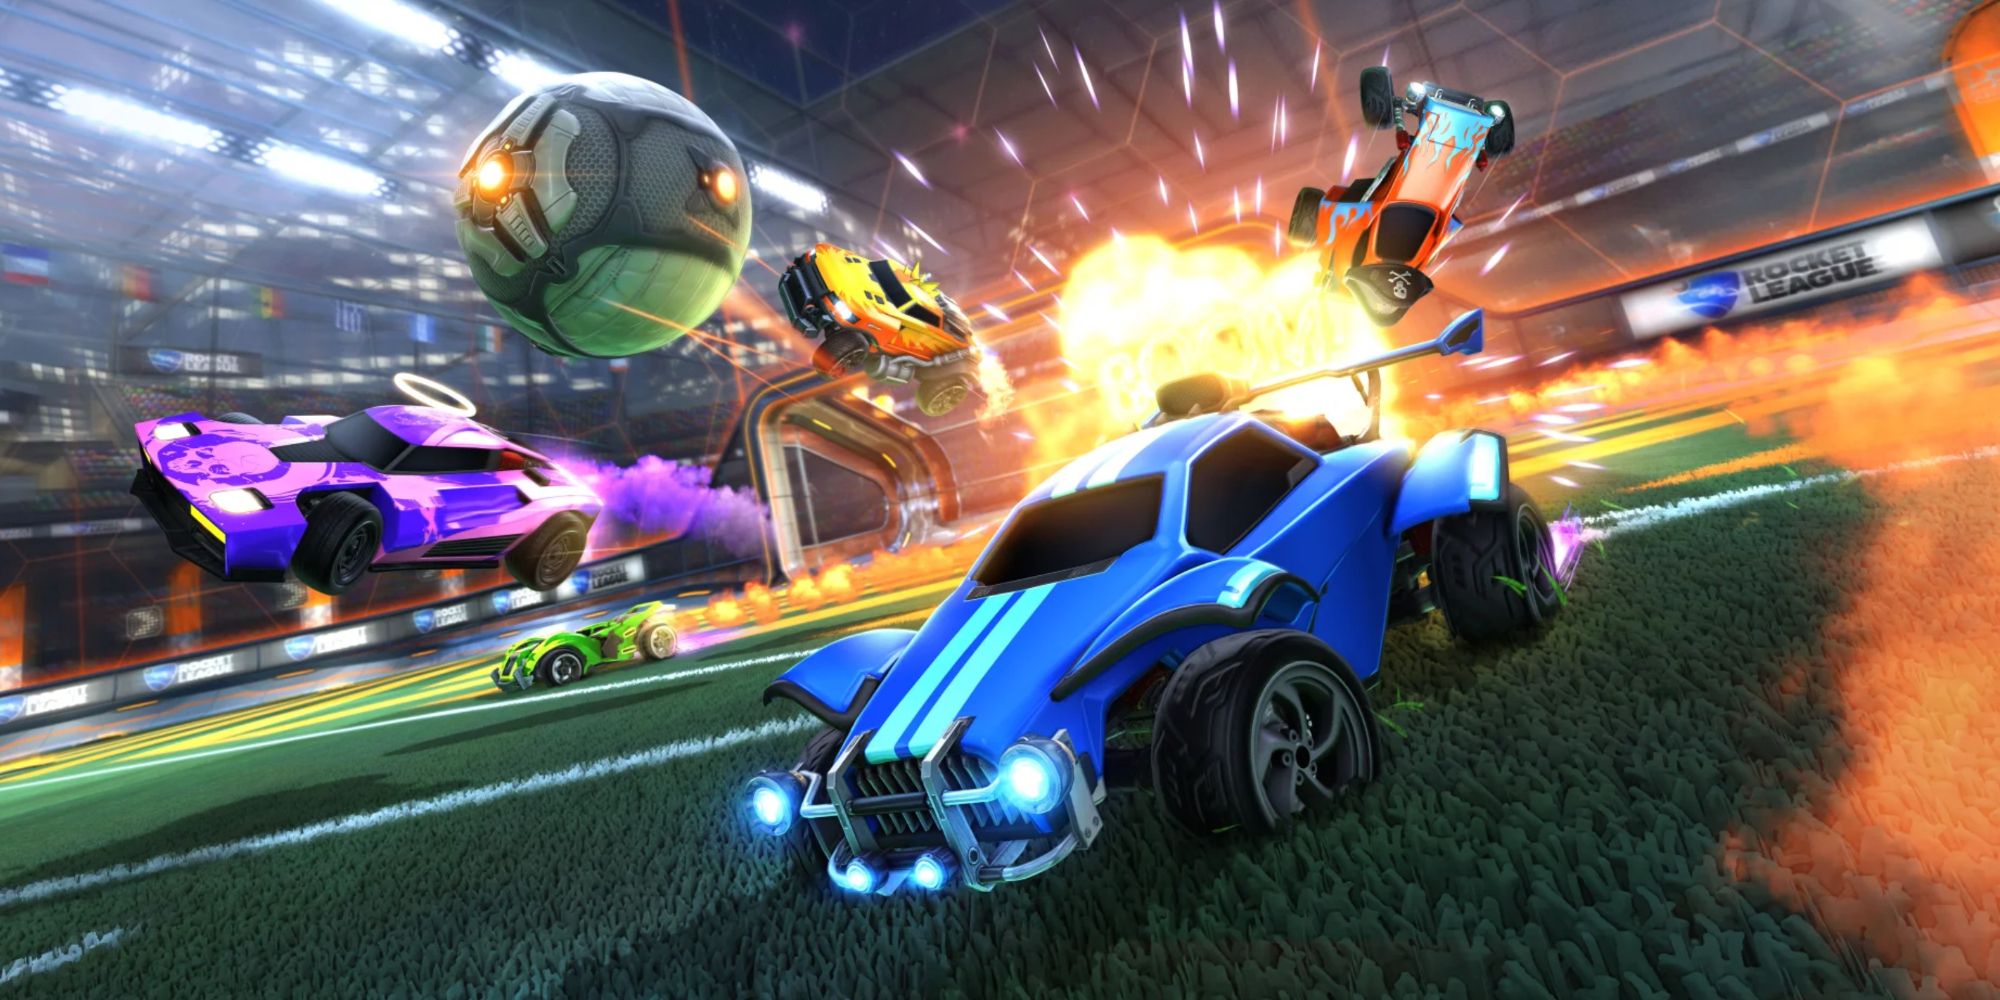 Chaotic game of Rocket League with five cars, the ball and an explosion in Rocket League